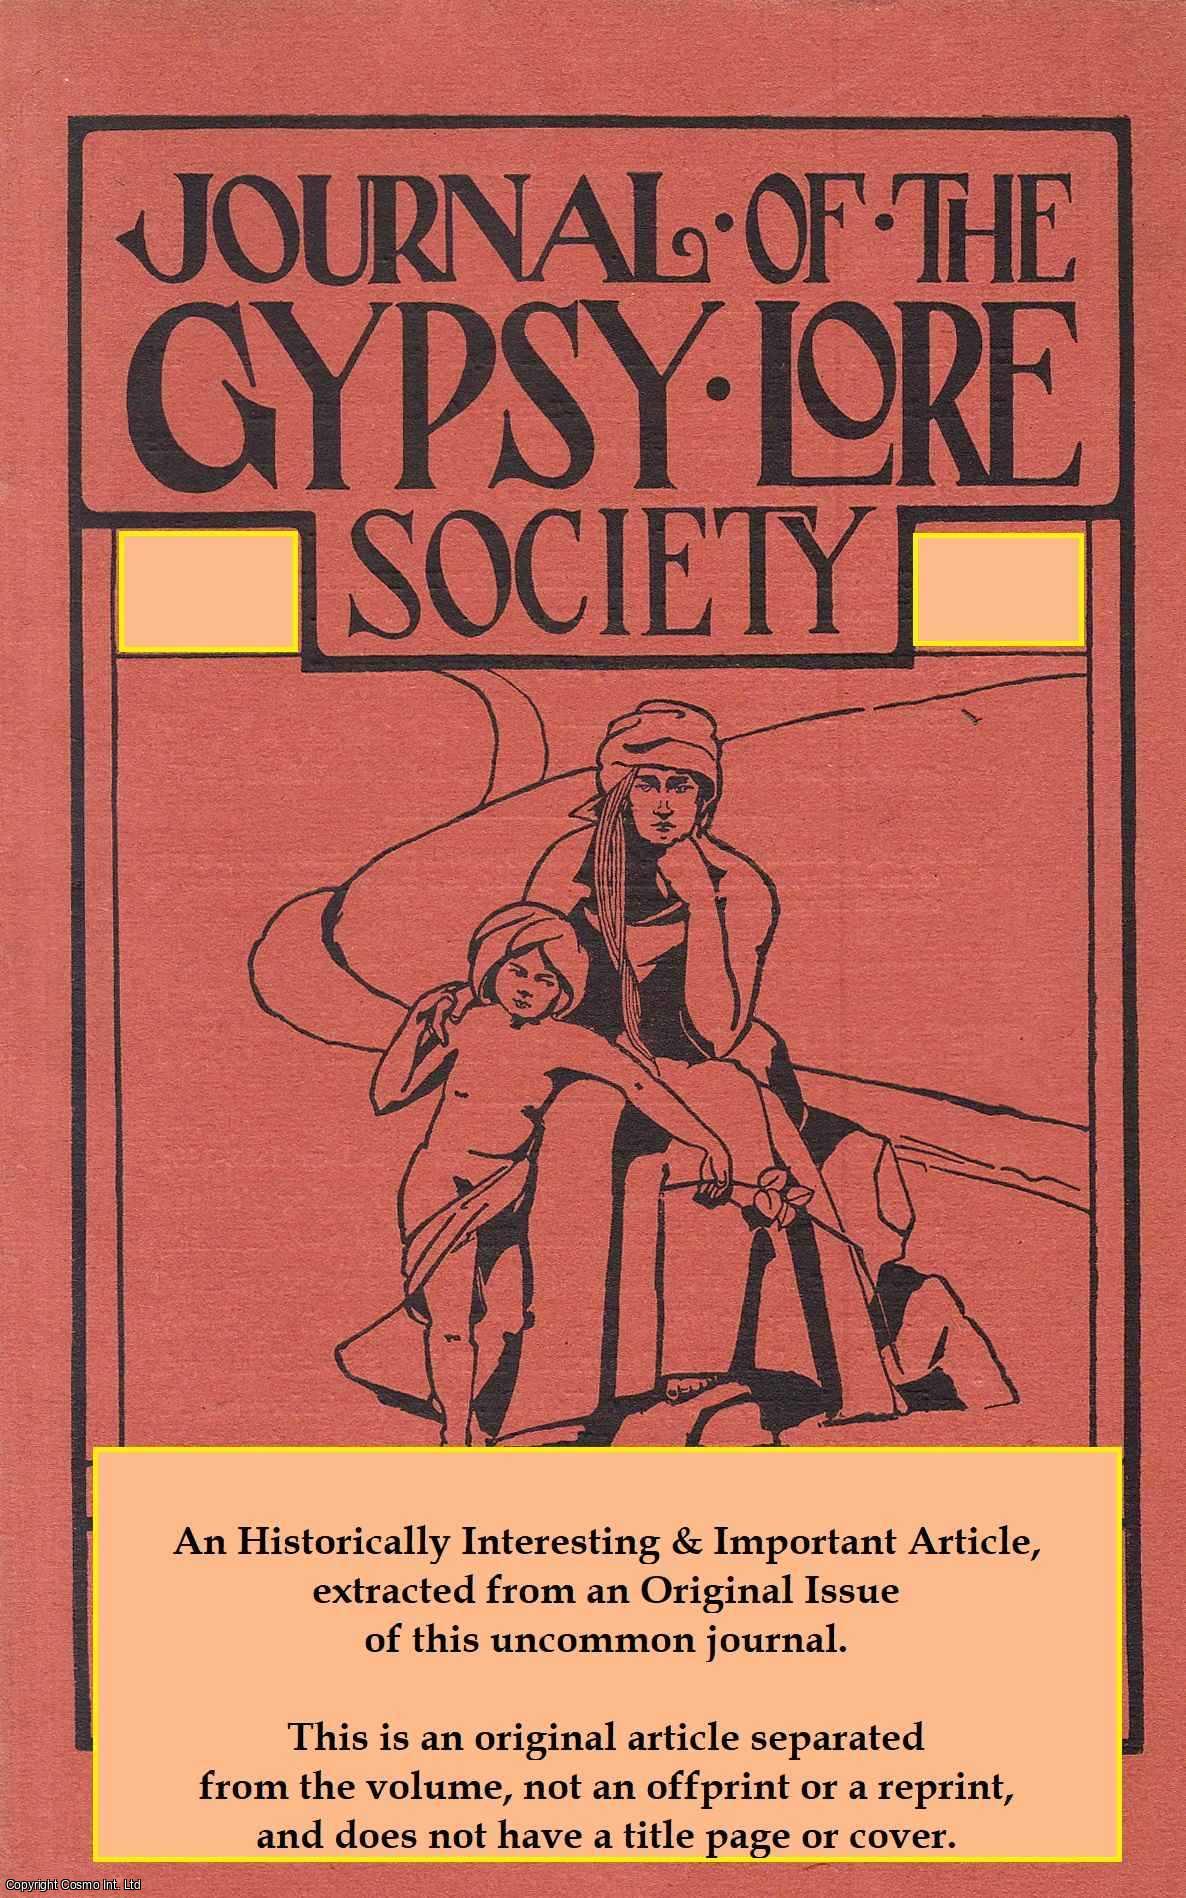 Andrew A. Marchbin - The Gypsies of Western Pennsylvania. An uncommon original article from the Journal of the Gypsy Lore Society, 1933.